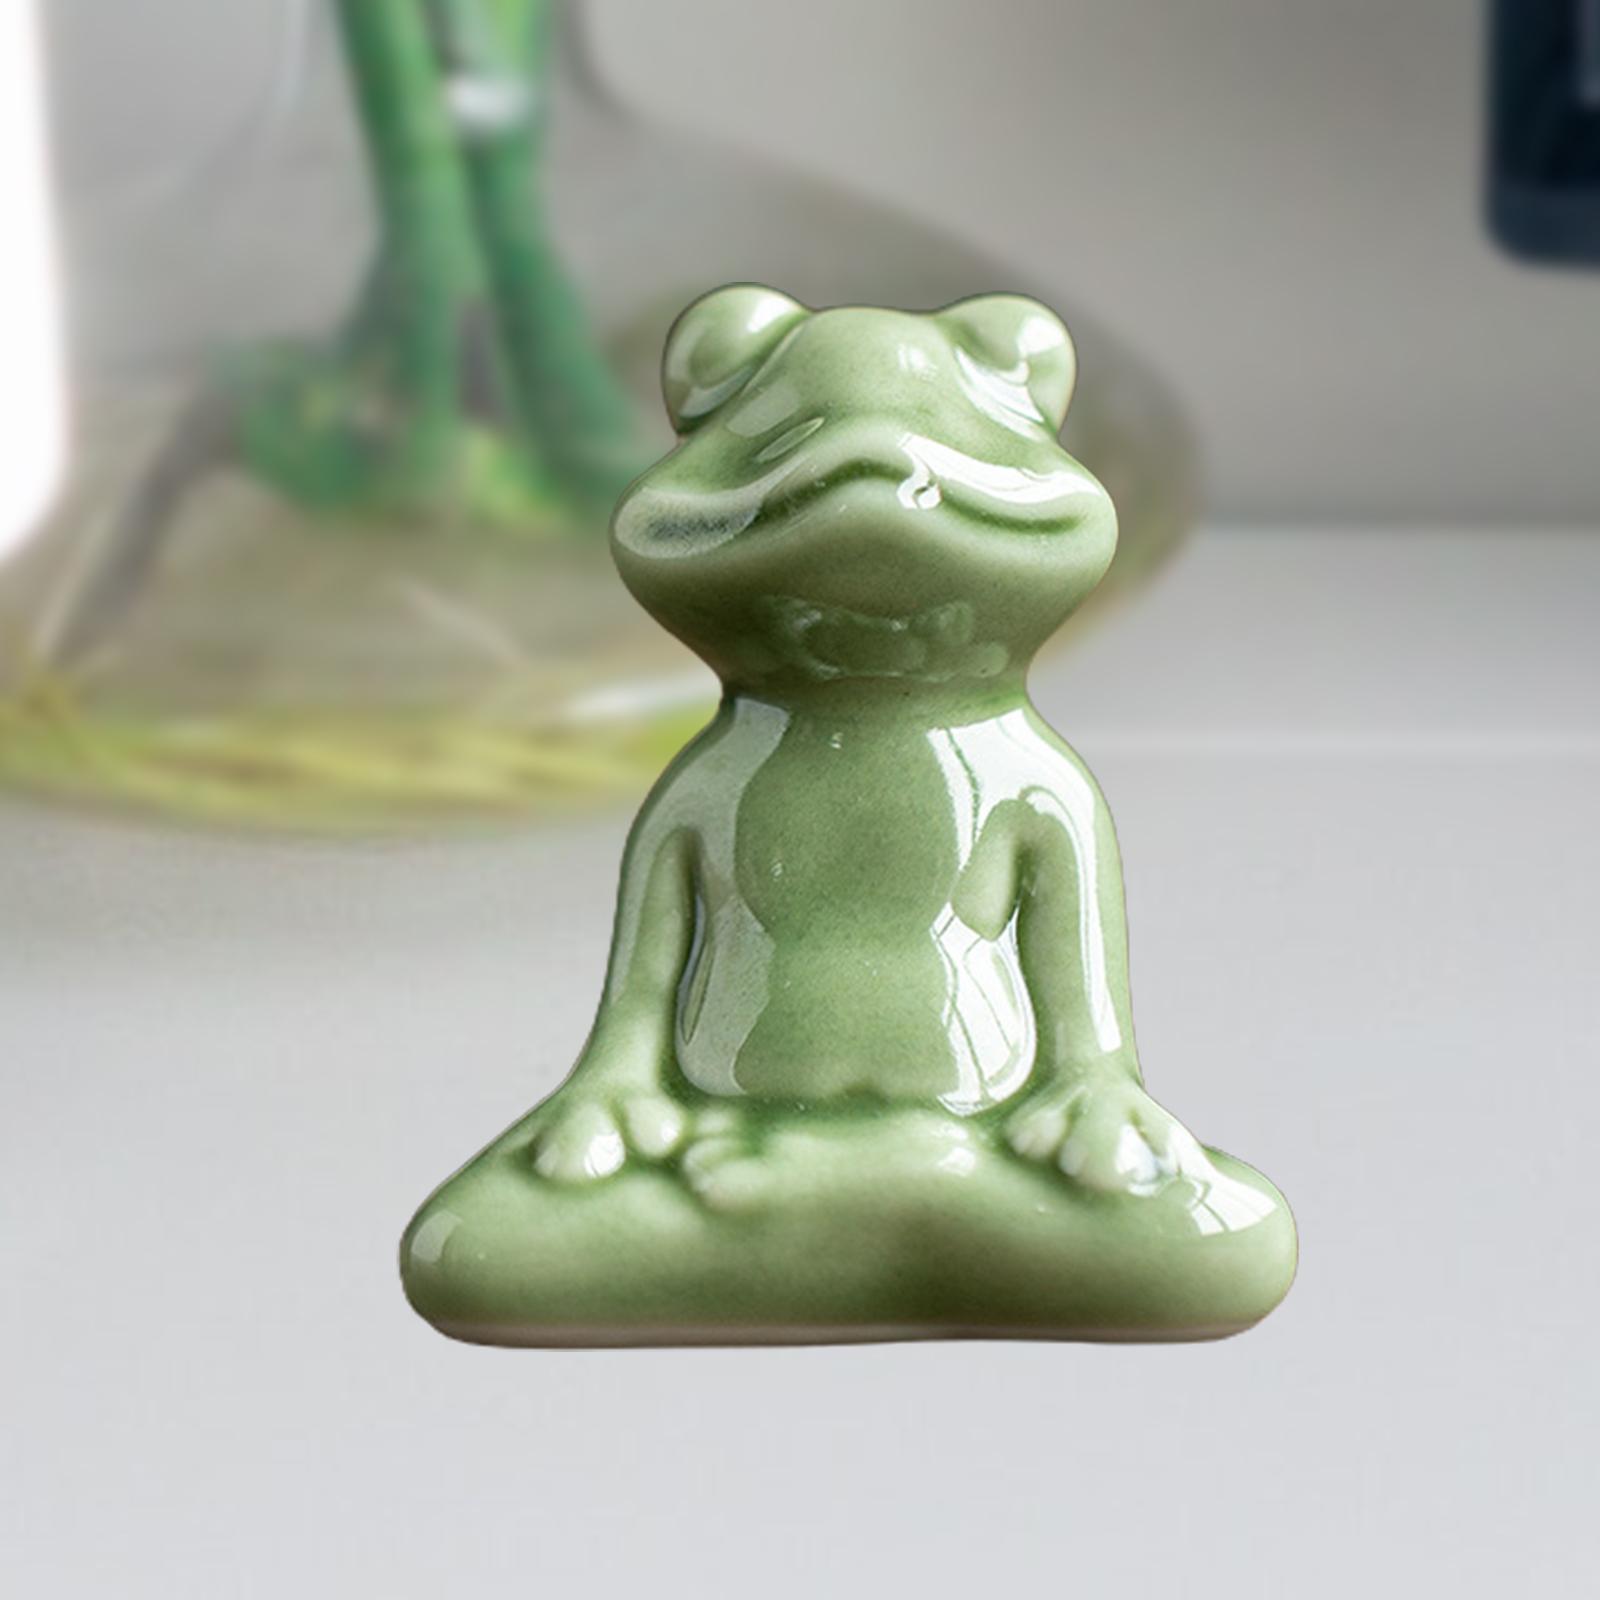 Miniature Frog Figurine Tea Pet Sculpture Small Frog Statue for Table Office StyleA 4.6x2.7x5.7cm